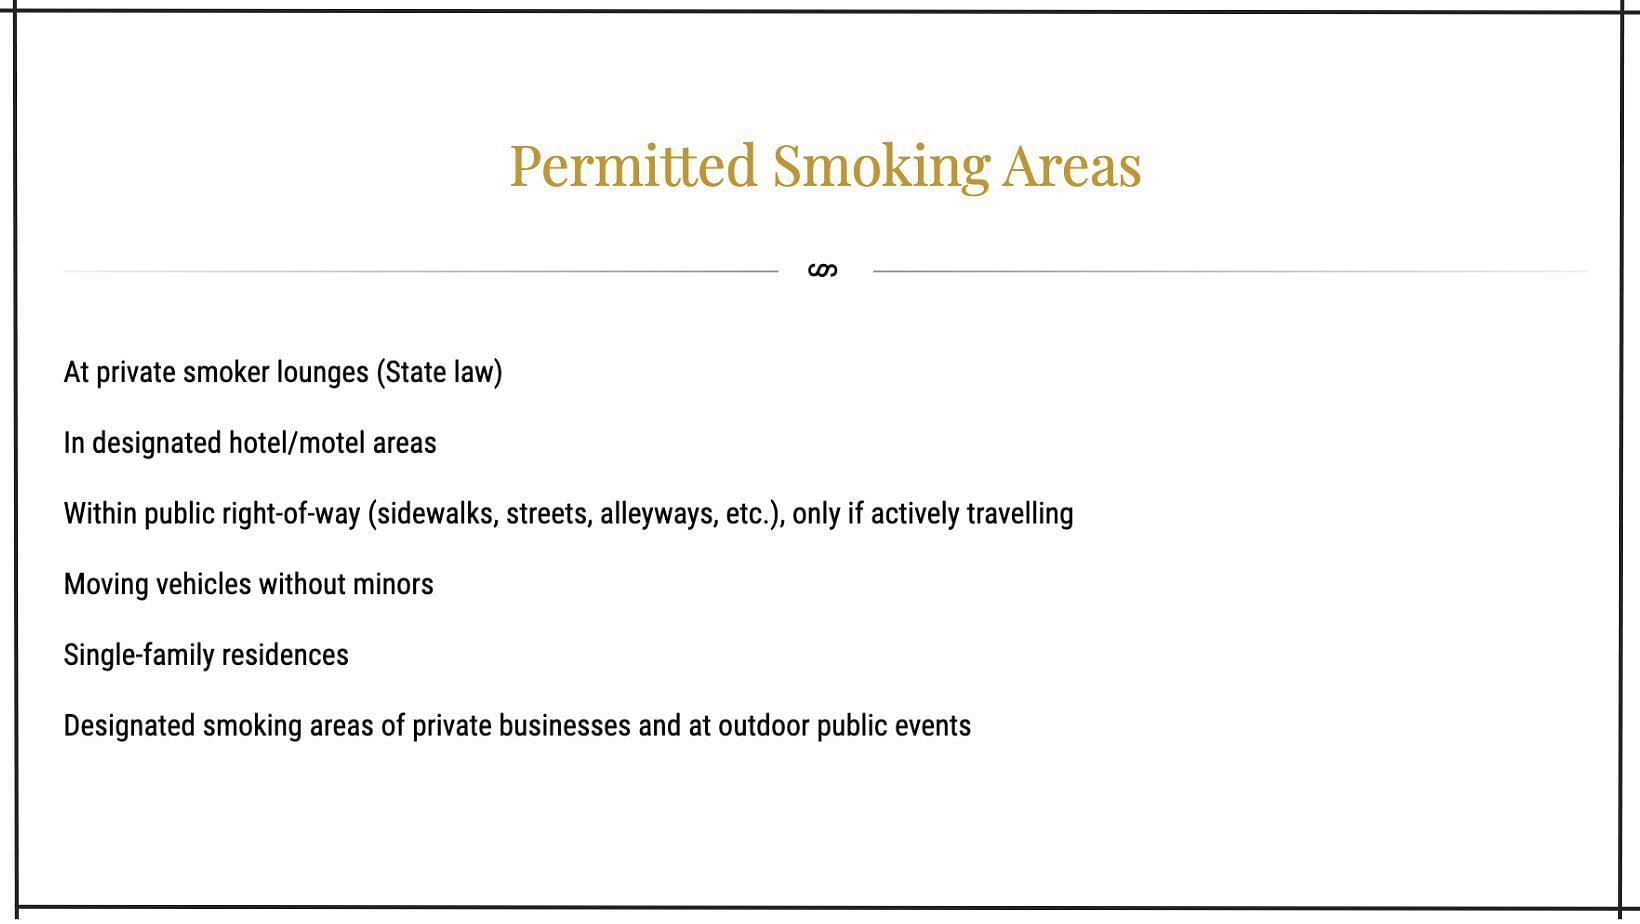 Smoking Law stated as per the official website of the California State Law